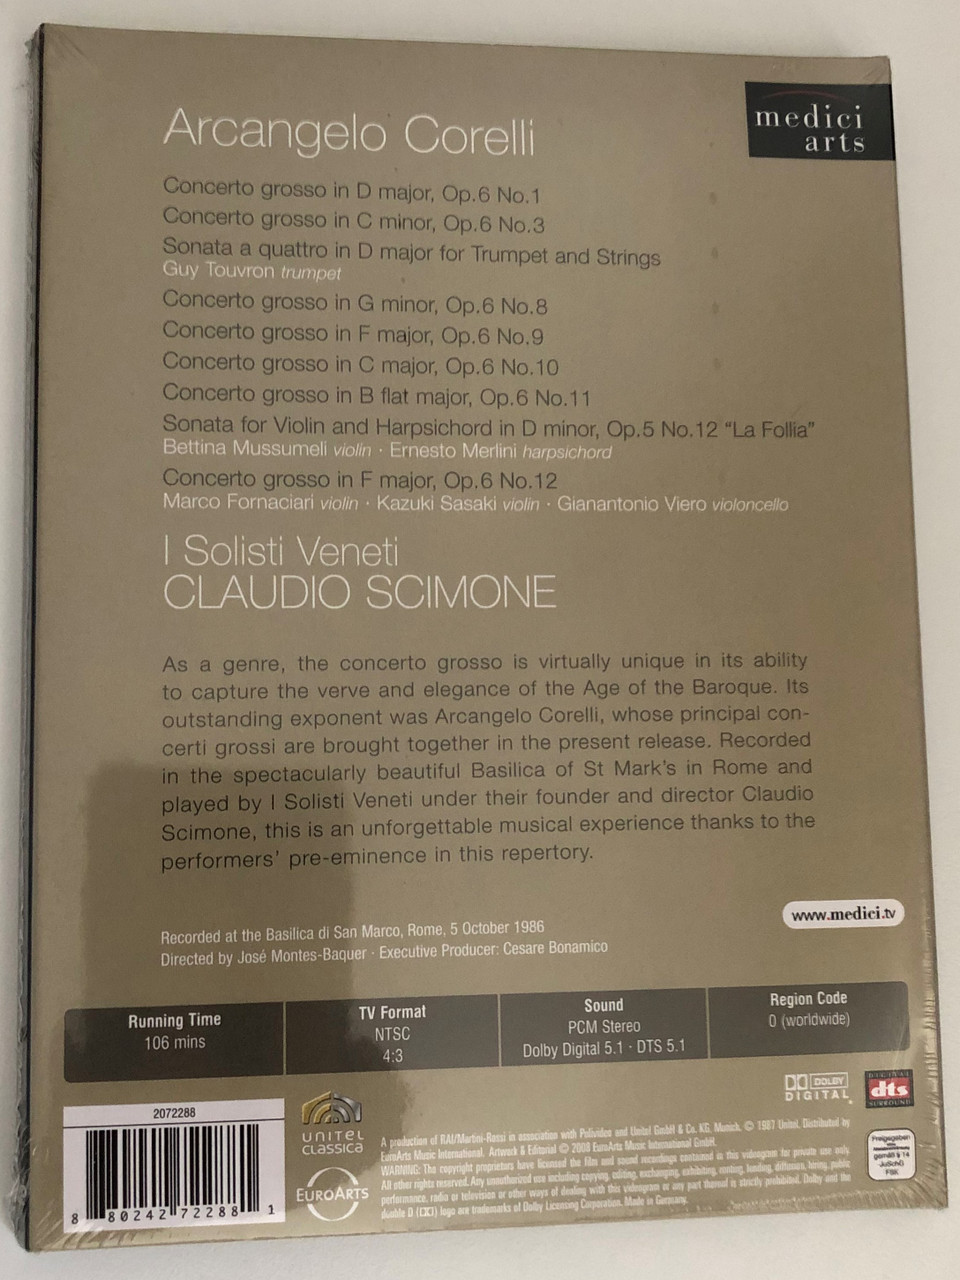 https://cdn10.bigcommerce.com/s-62bdpkt7pb/products/55193/images/277287/Arcangelo_Corelli_Concerti_Grossi_Op._6_I_Solisti_Veneti_Claudio_Scimone_Recorded_at_the_Basilica_of_San_Marco_Rome_5_October_1988_Directed_by_Jose_Montes-Baquer_Producer_3__37235.1687255127.1280.1280.JPG?c=2